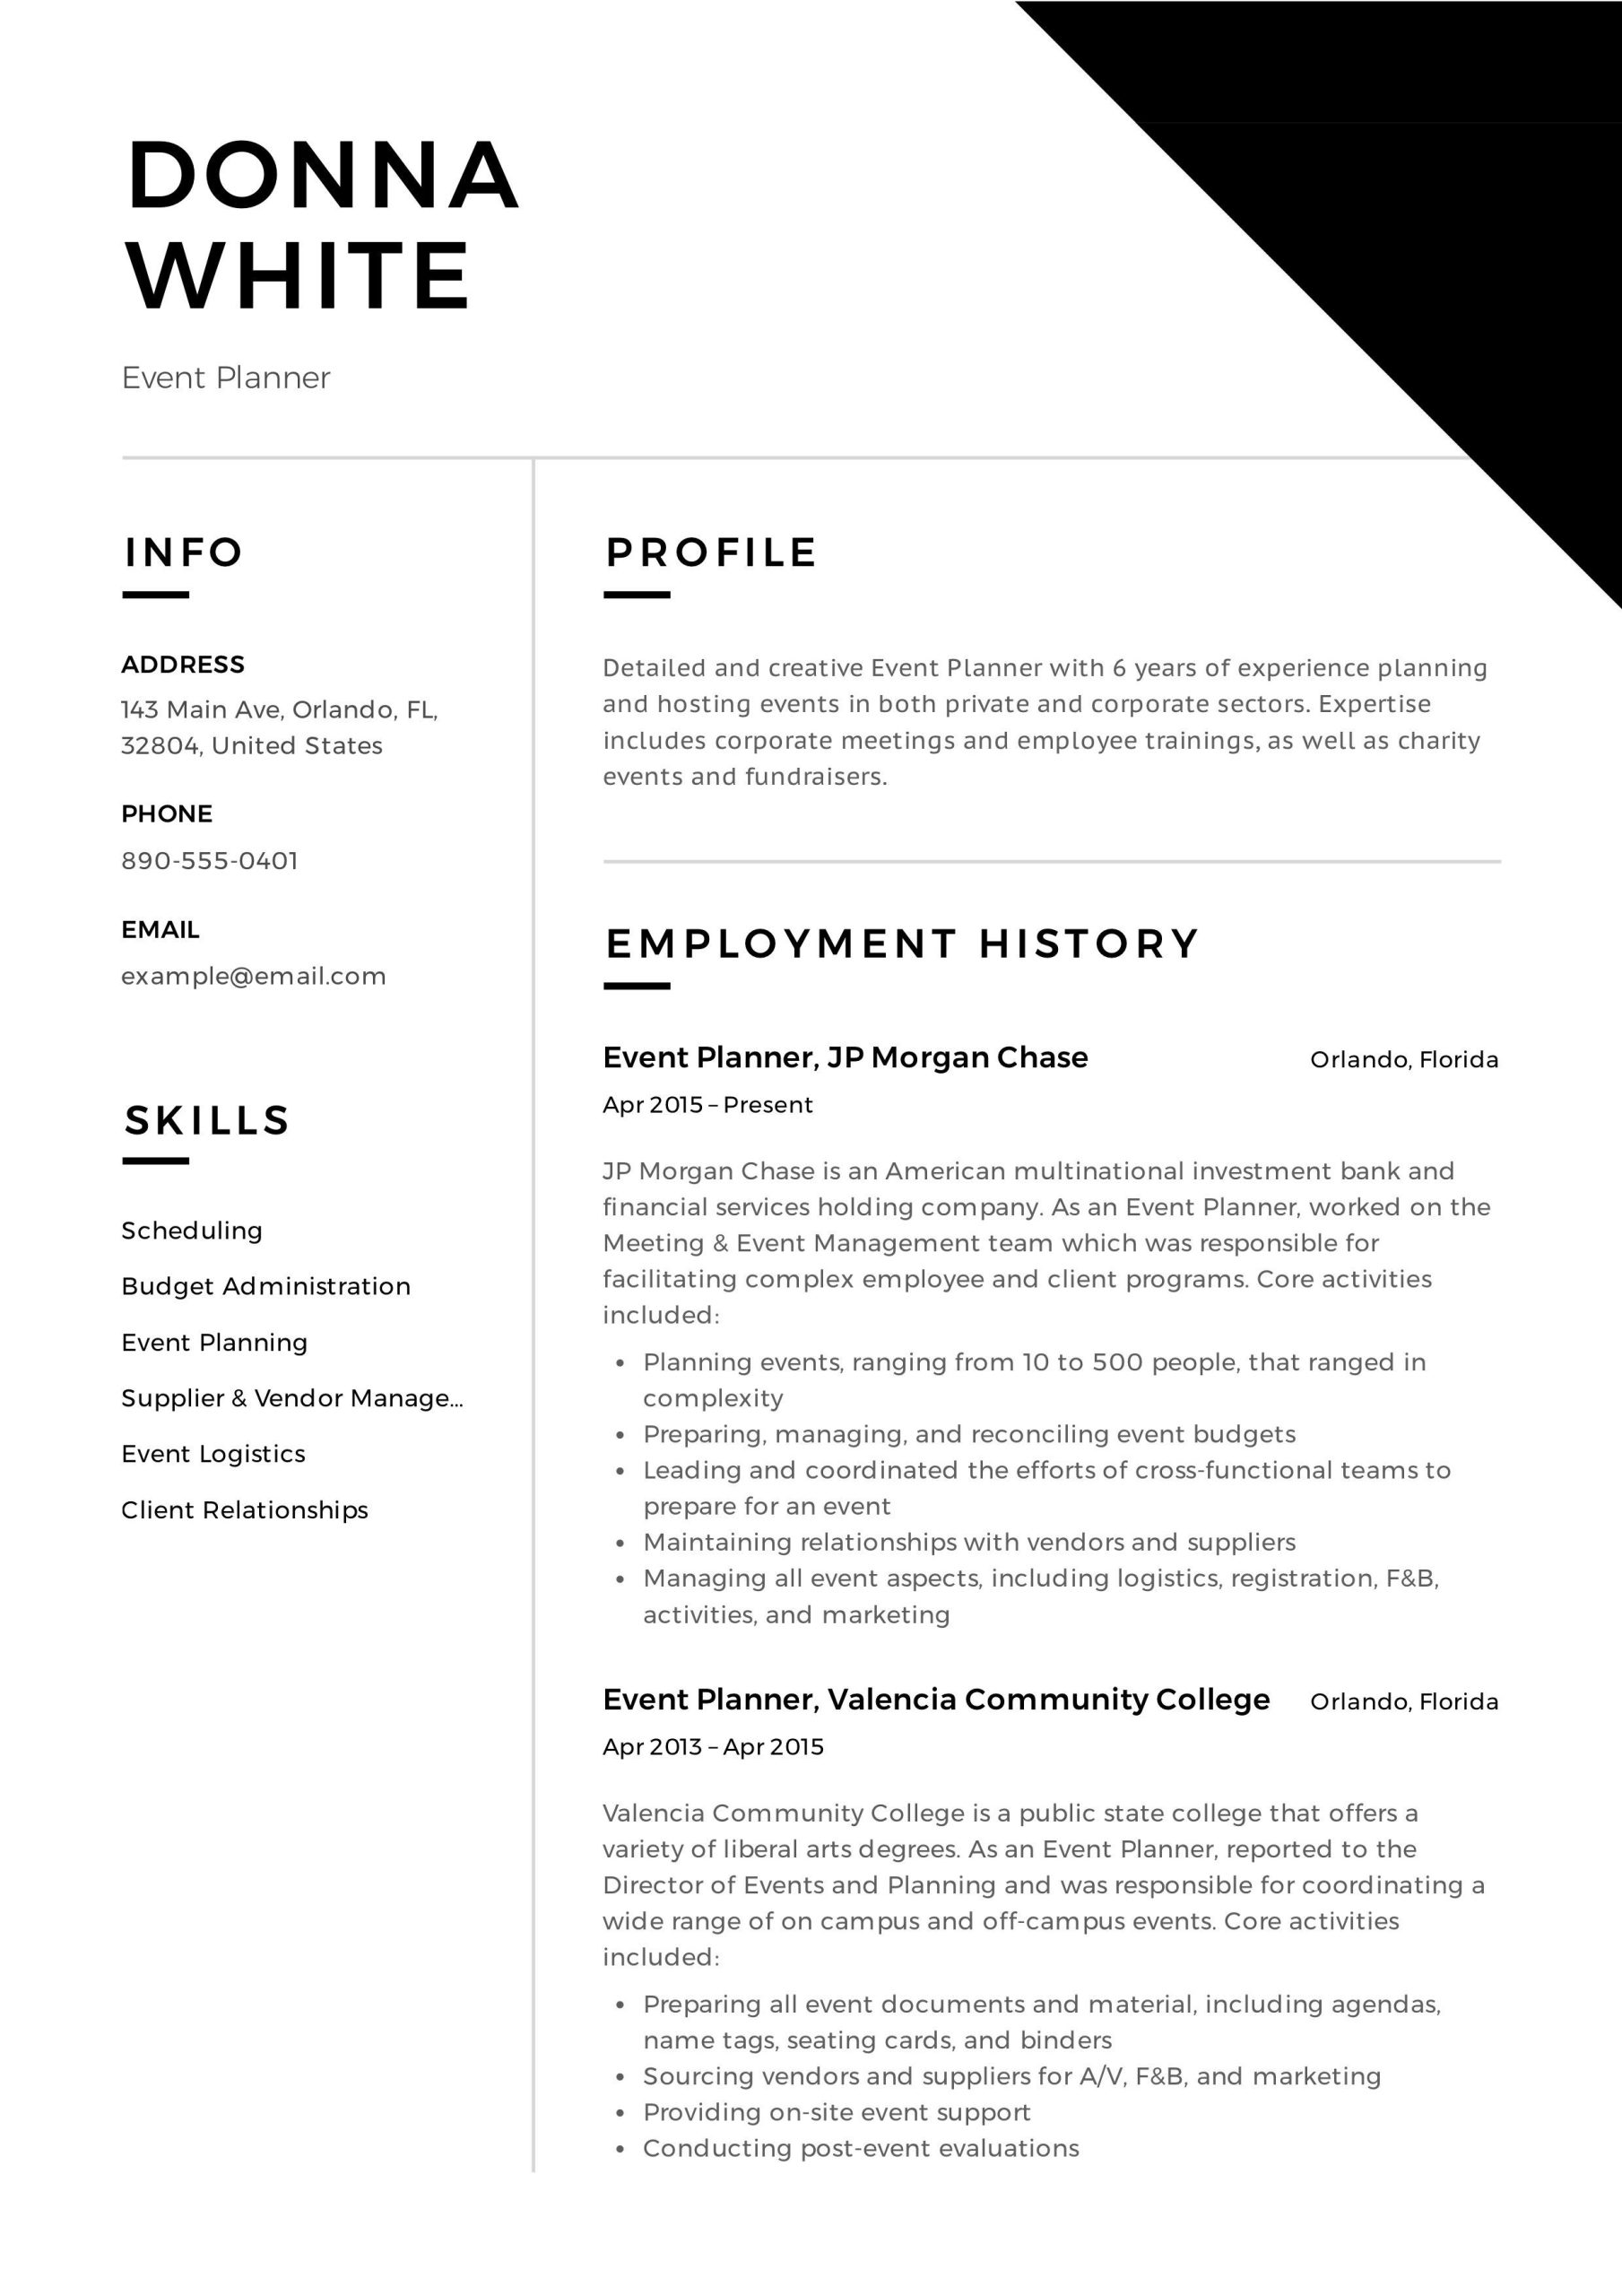 Party Planning event Layout Resume Samples event Planner Resume event Planner Resume, Professional Resume …